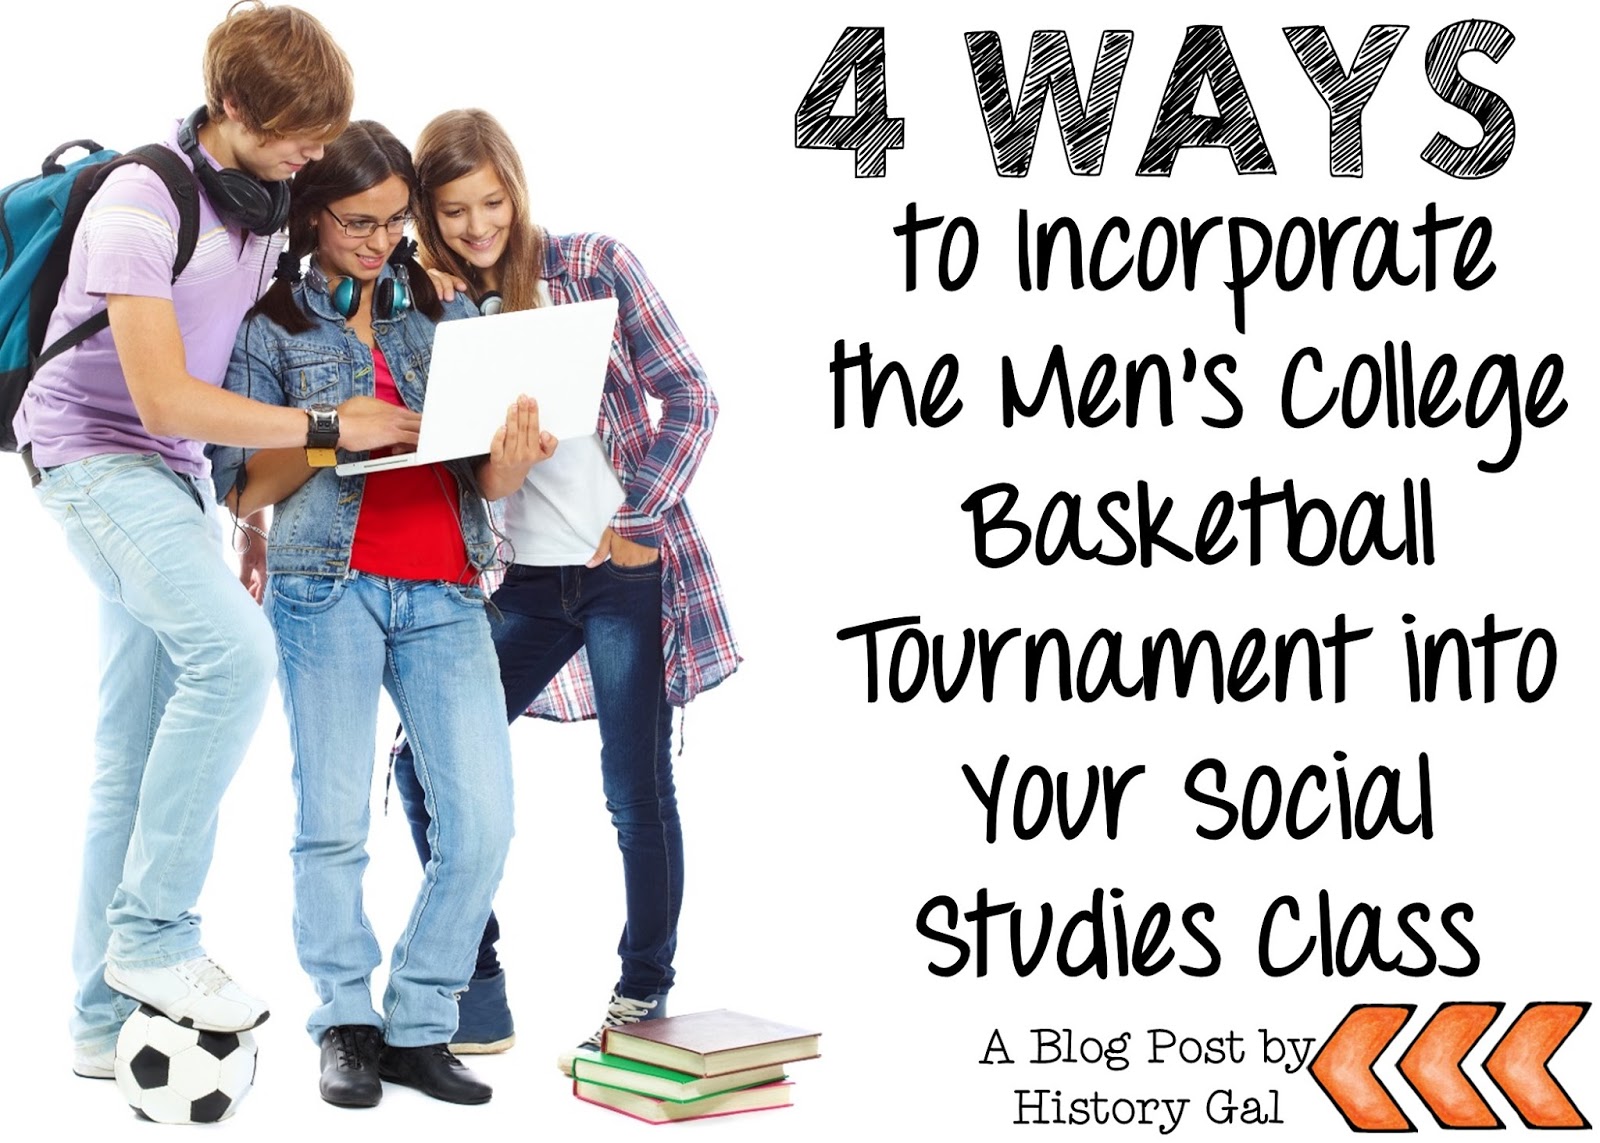 4 ways to incorporate the Men's college basketball tournament into your Social Studies class by History Gal